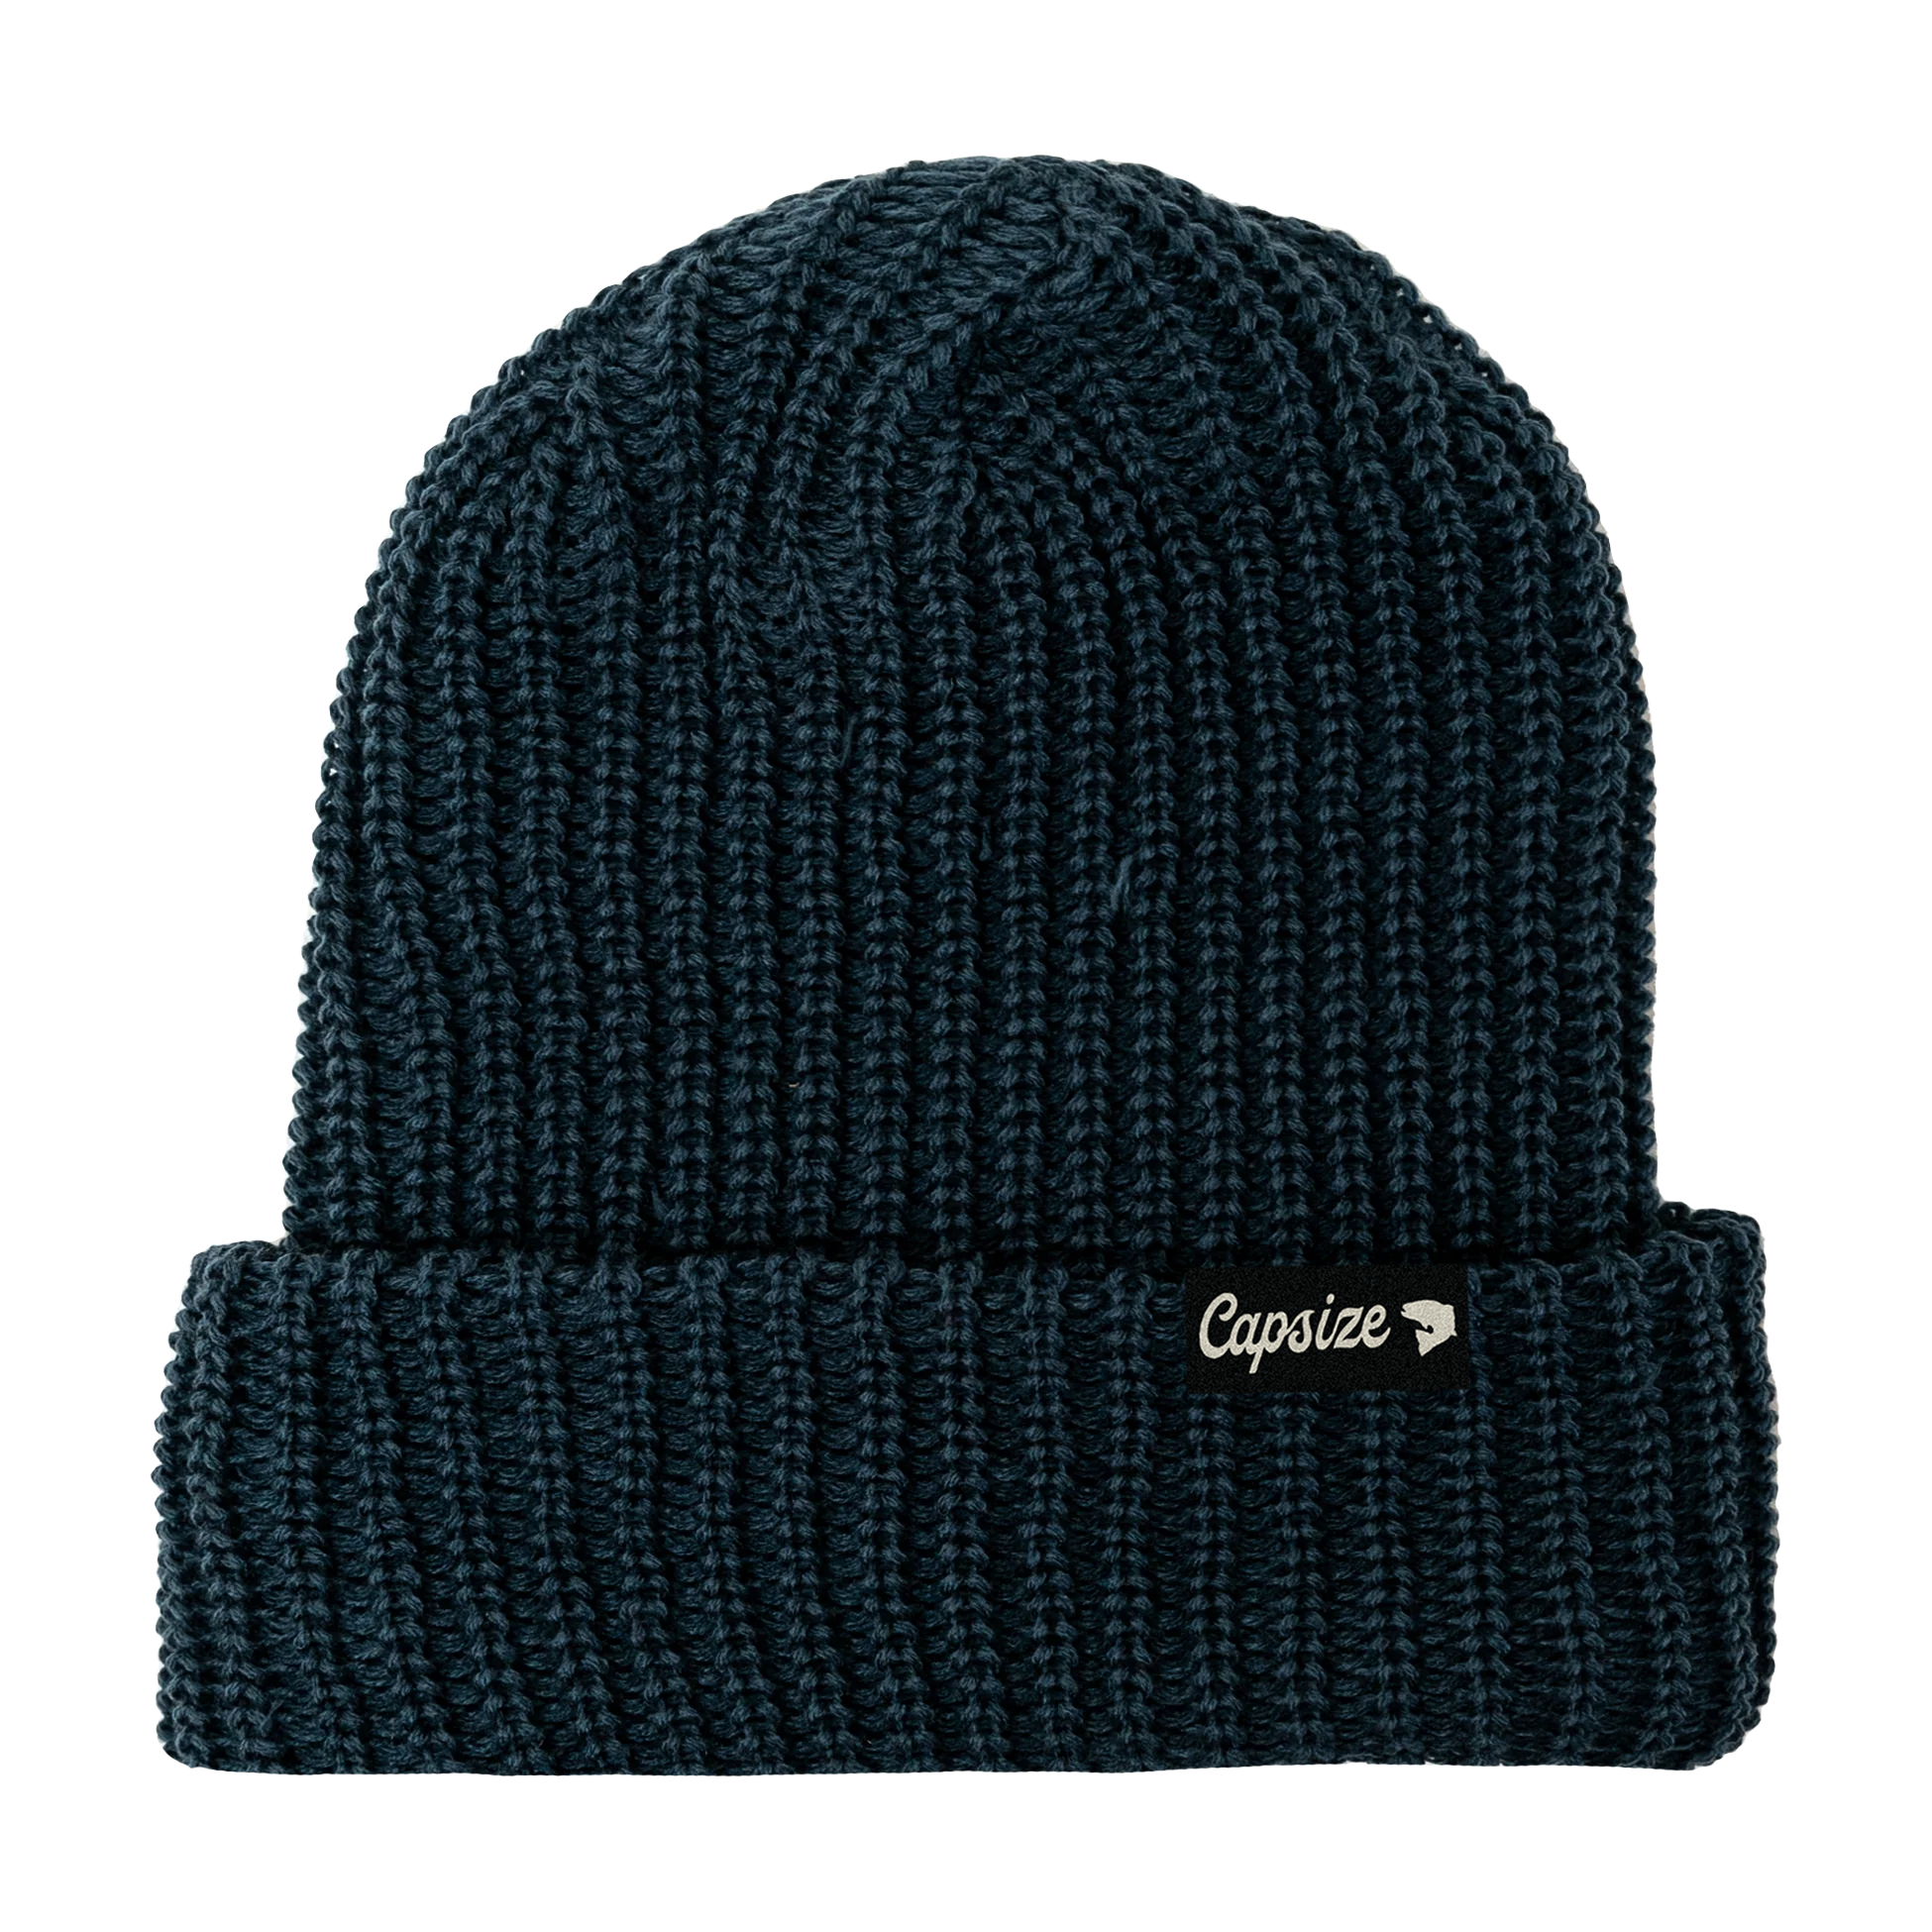 Fly Fishing Beanie | Mountain Eclipse Beanie - Capsize Fly Fishing